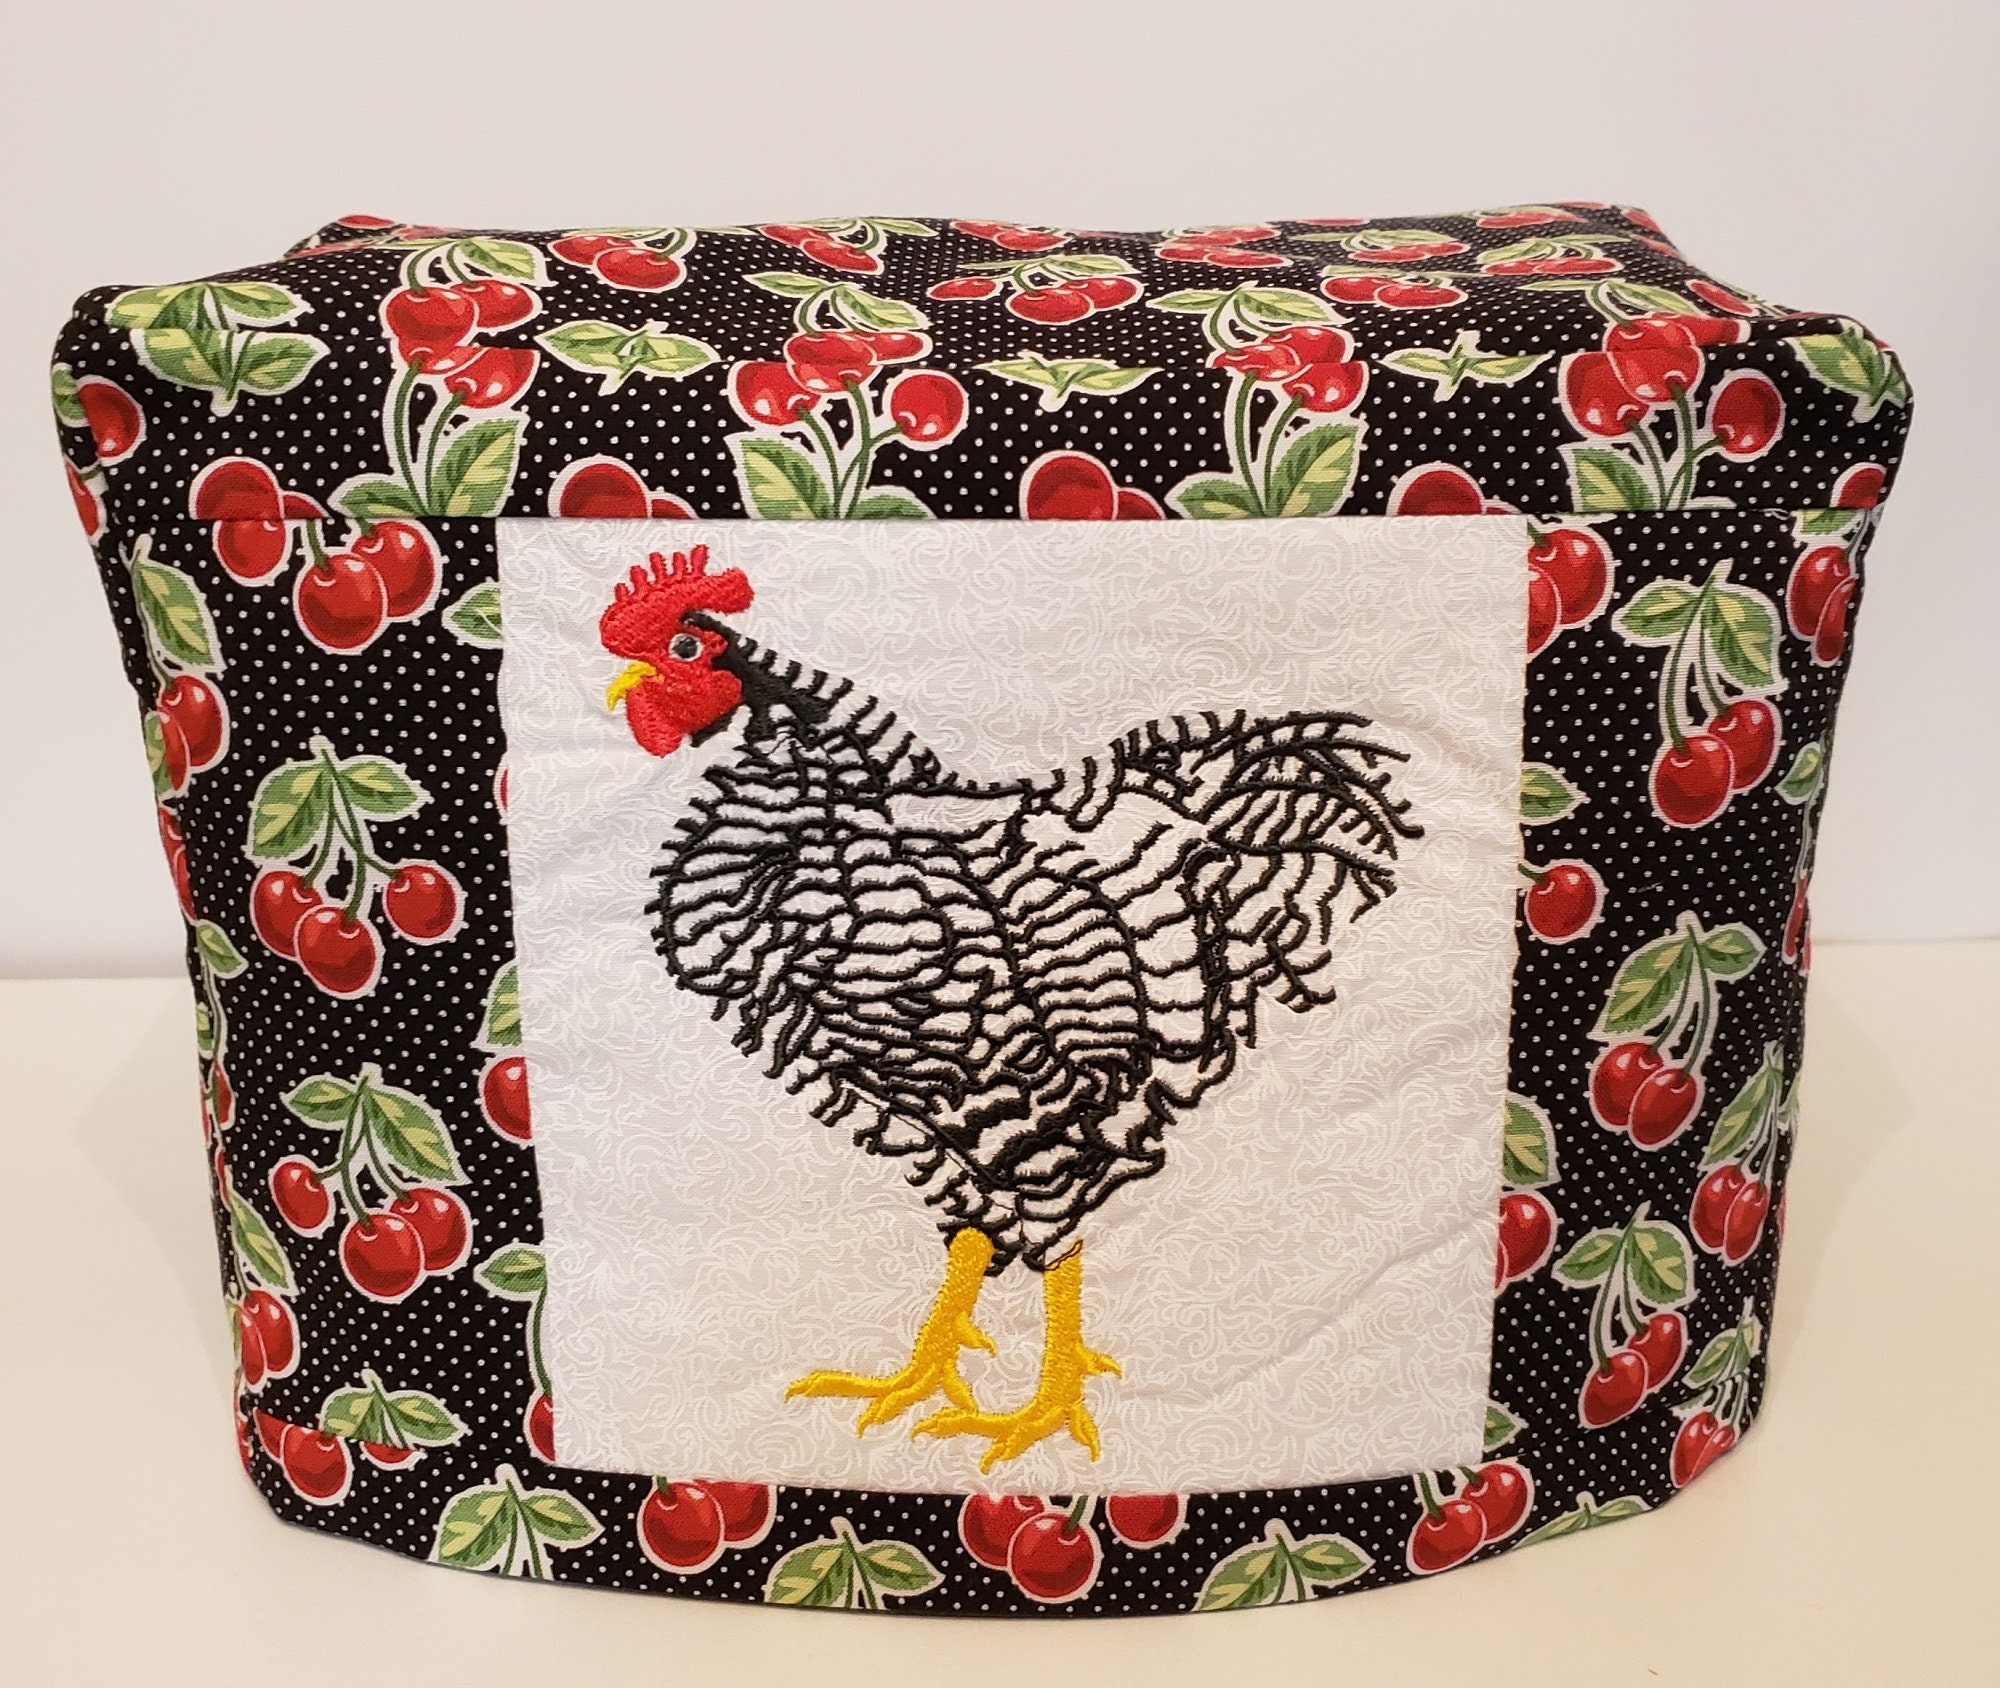 h 2 Slice Slot Farmer's Market Roosters Barnyard Poultry Fresh Eggs Reversible Toaster Appliance Dust Cover Cozy 11.5 l x 7.5 x 5.5 w 